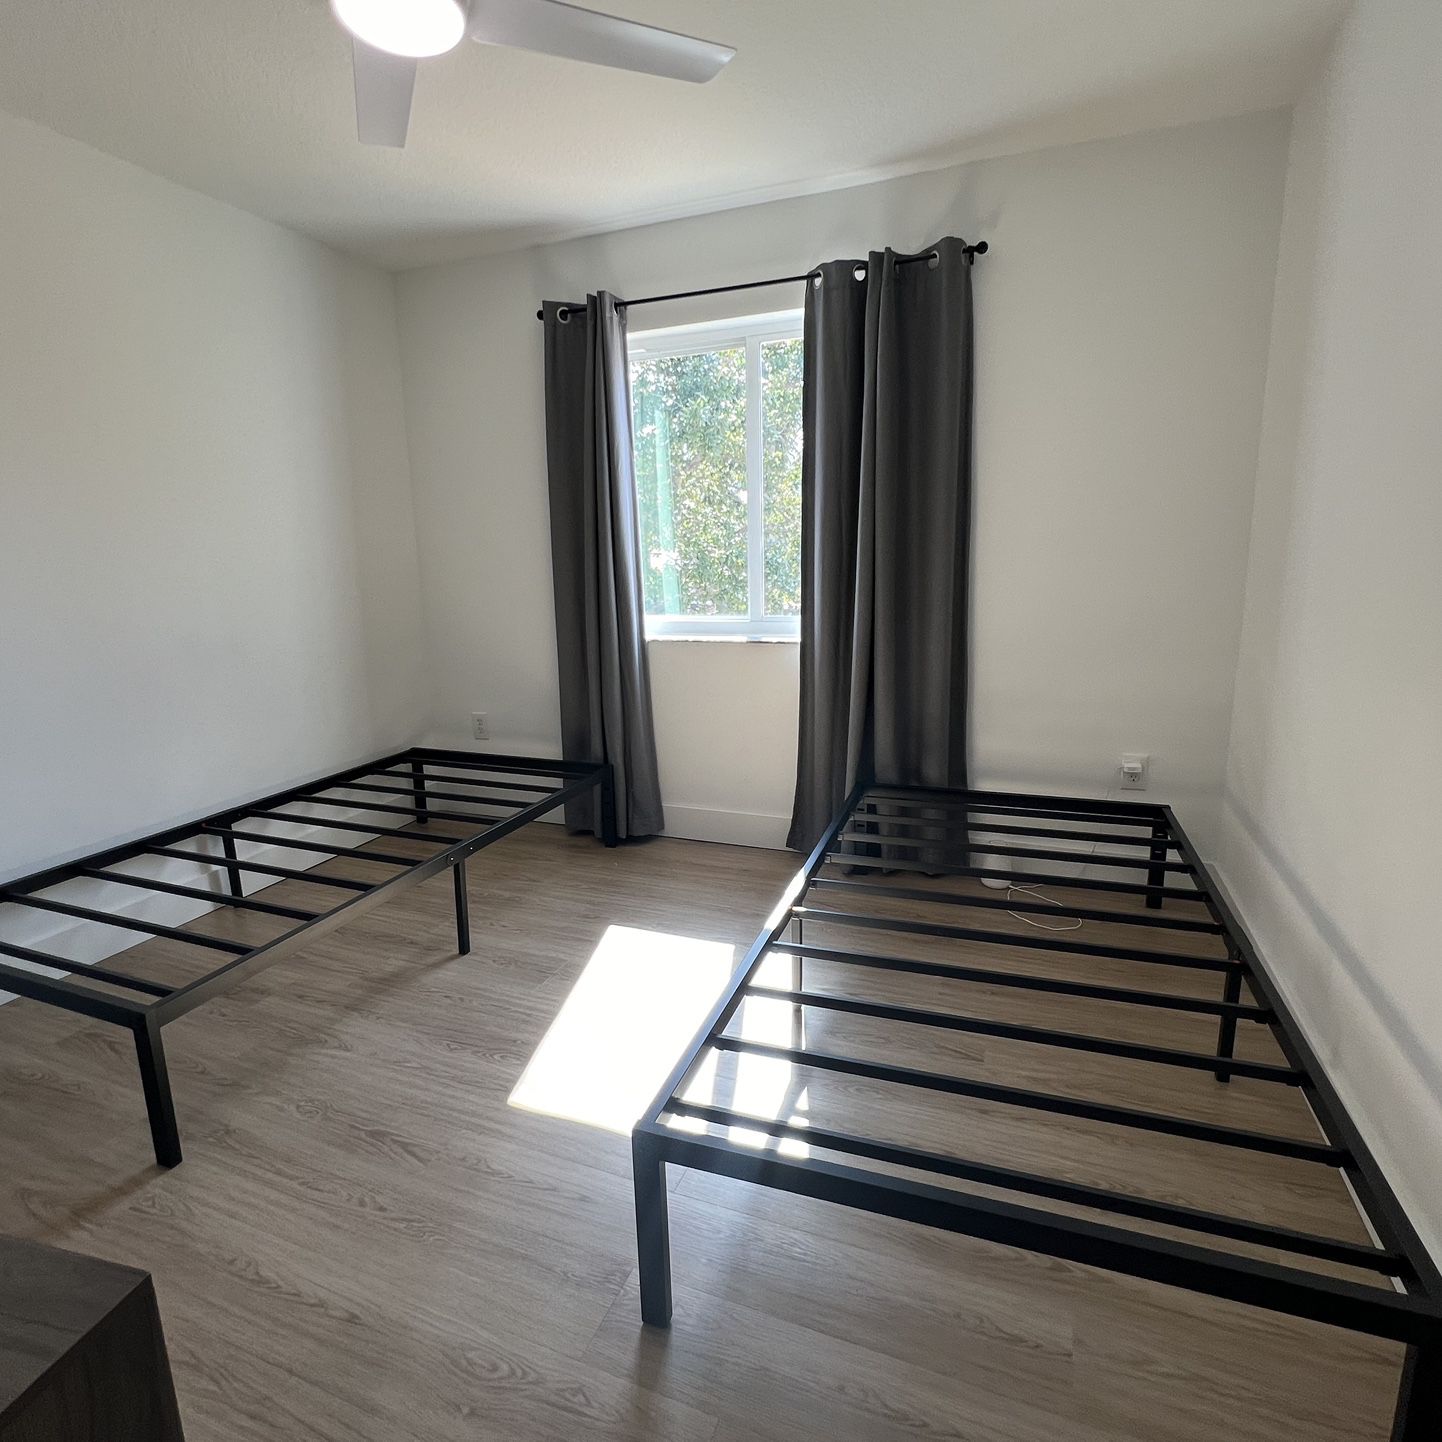 TWO Twin Bed Frames